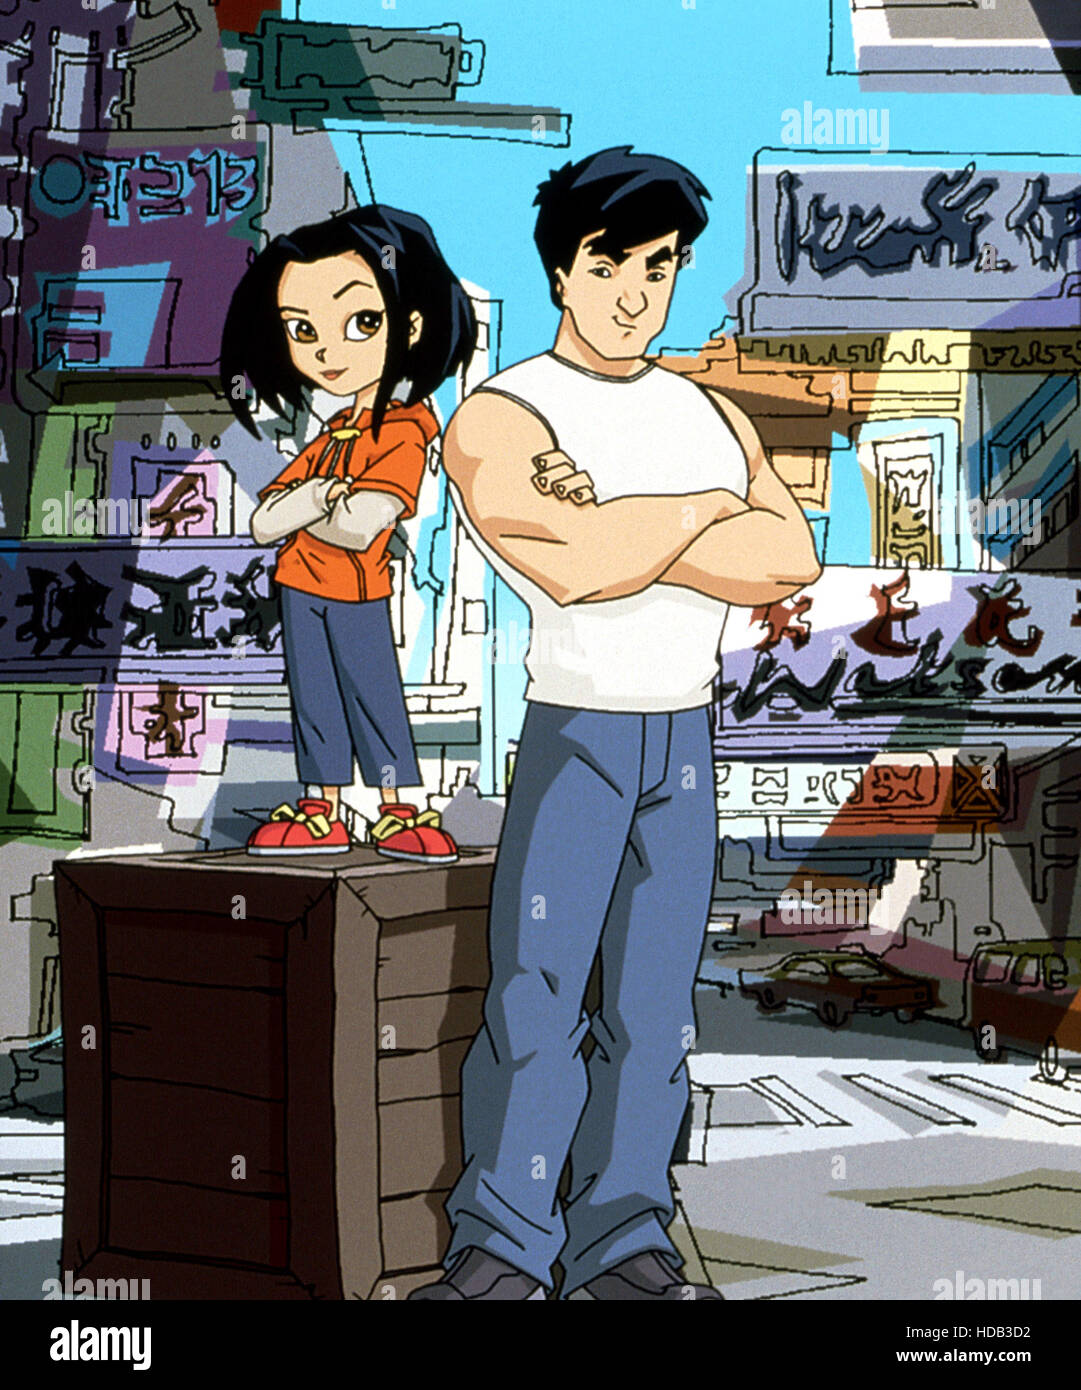 JACKIE CHAN ADVENTURES, (from left): Jade Chan, Jackie Chan, 2000-05. ©  Columbia TriStar Television / Courtesy: Everett Stock Photo - Alamy